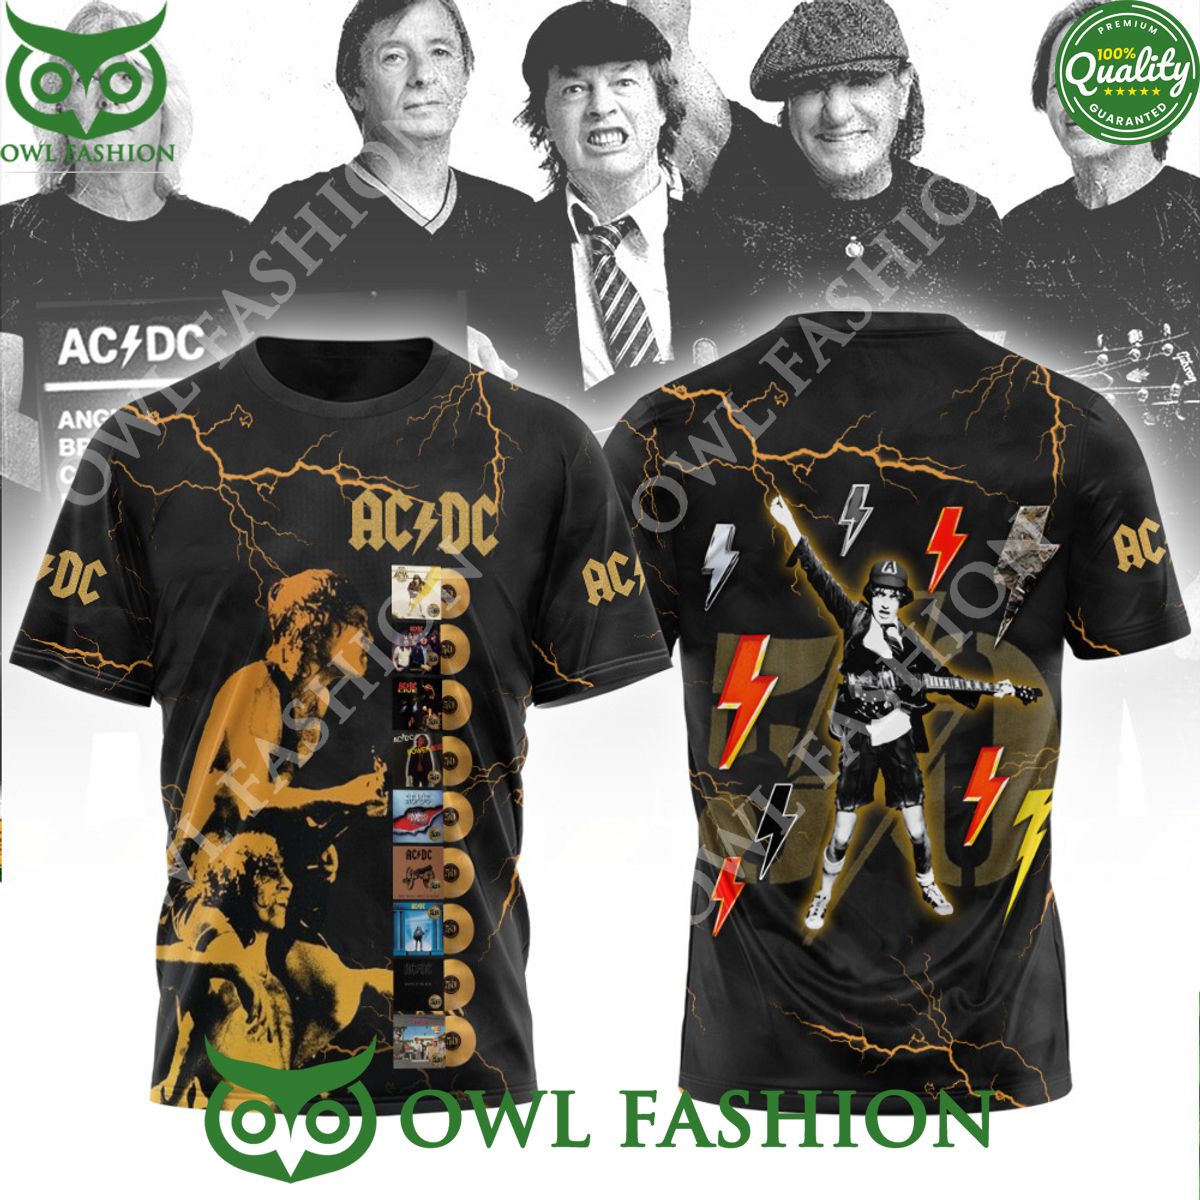 ACDC Thunderstorm Black 3D T Shirt Our hard working soul